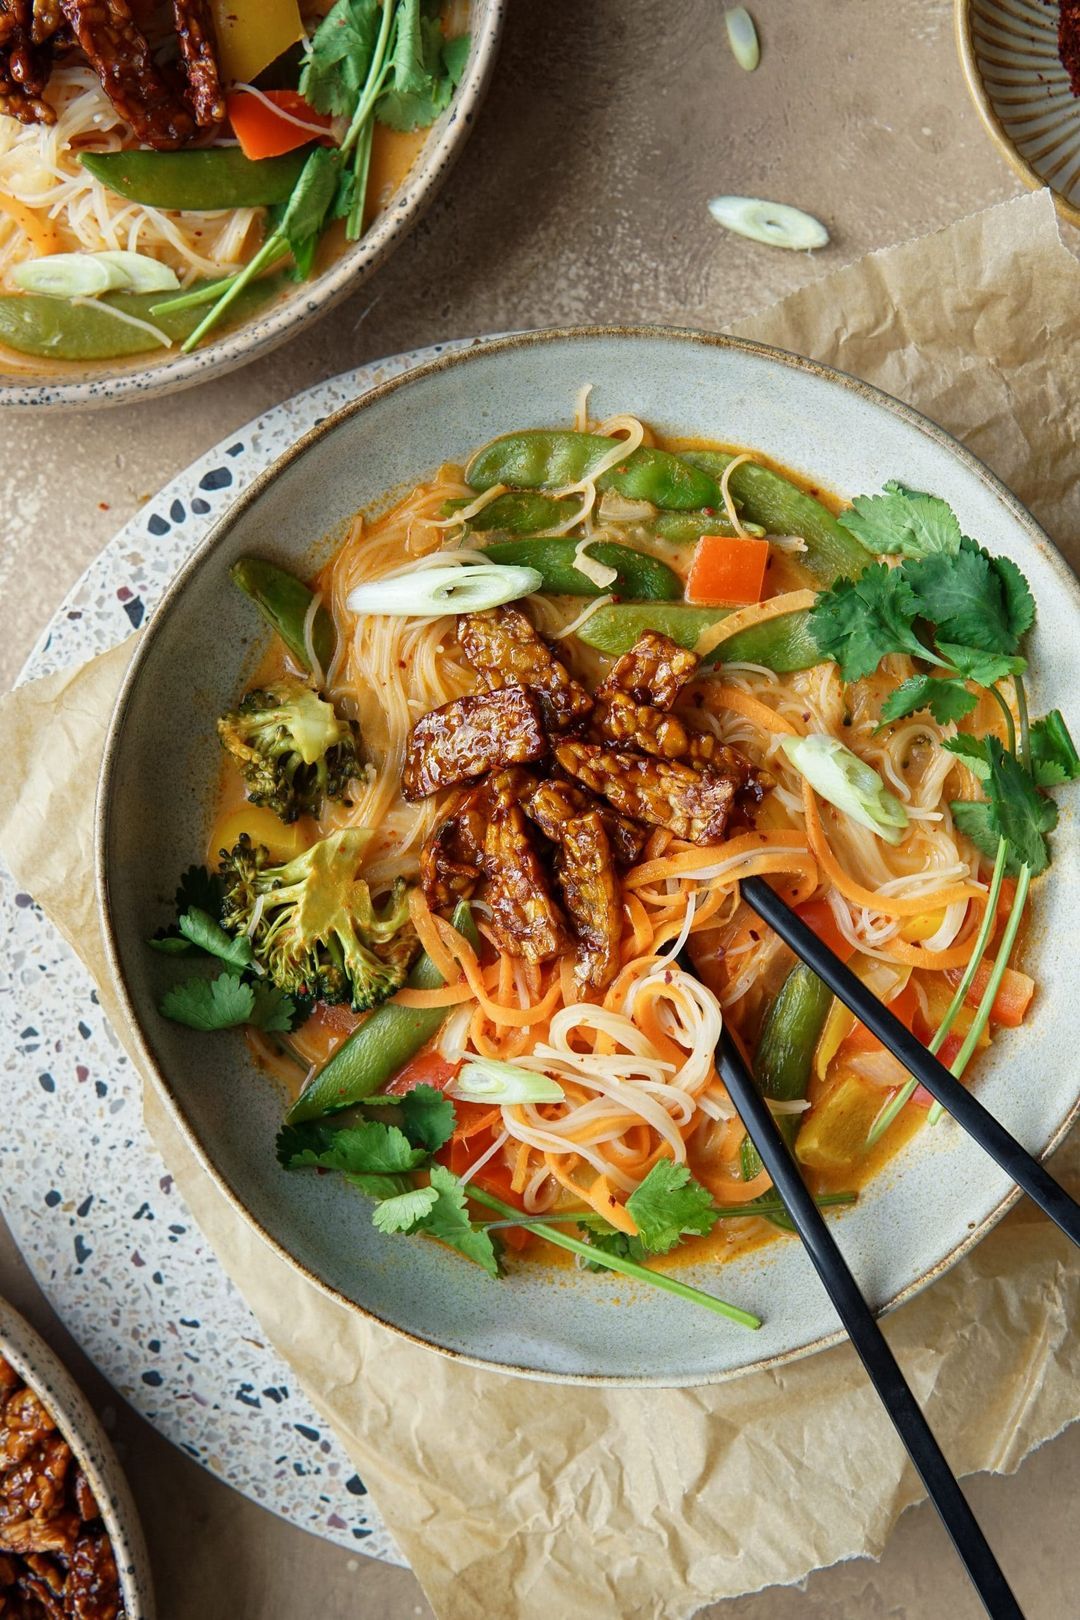 Thai red curry noodle soup